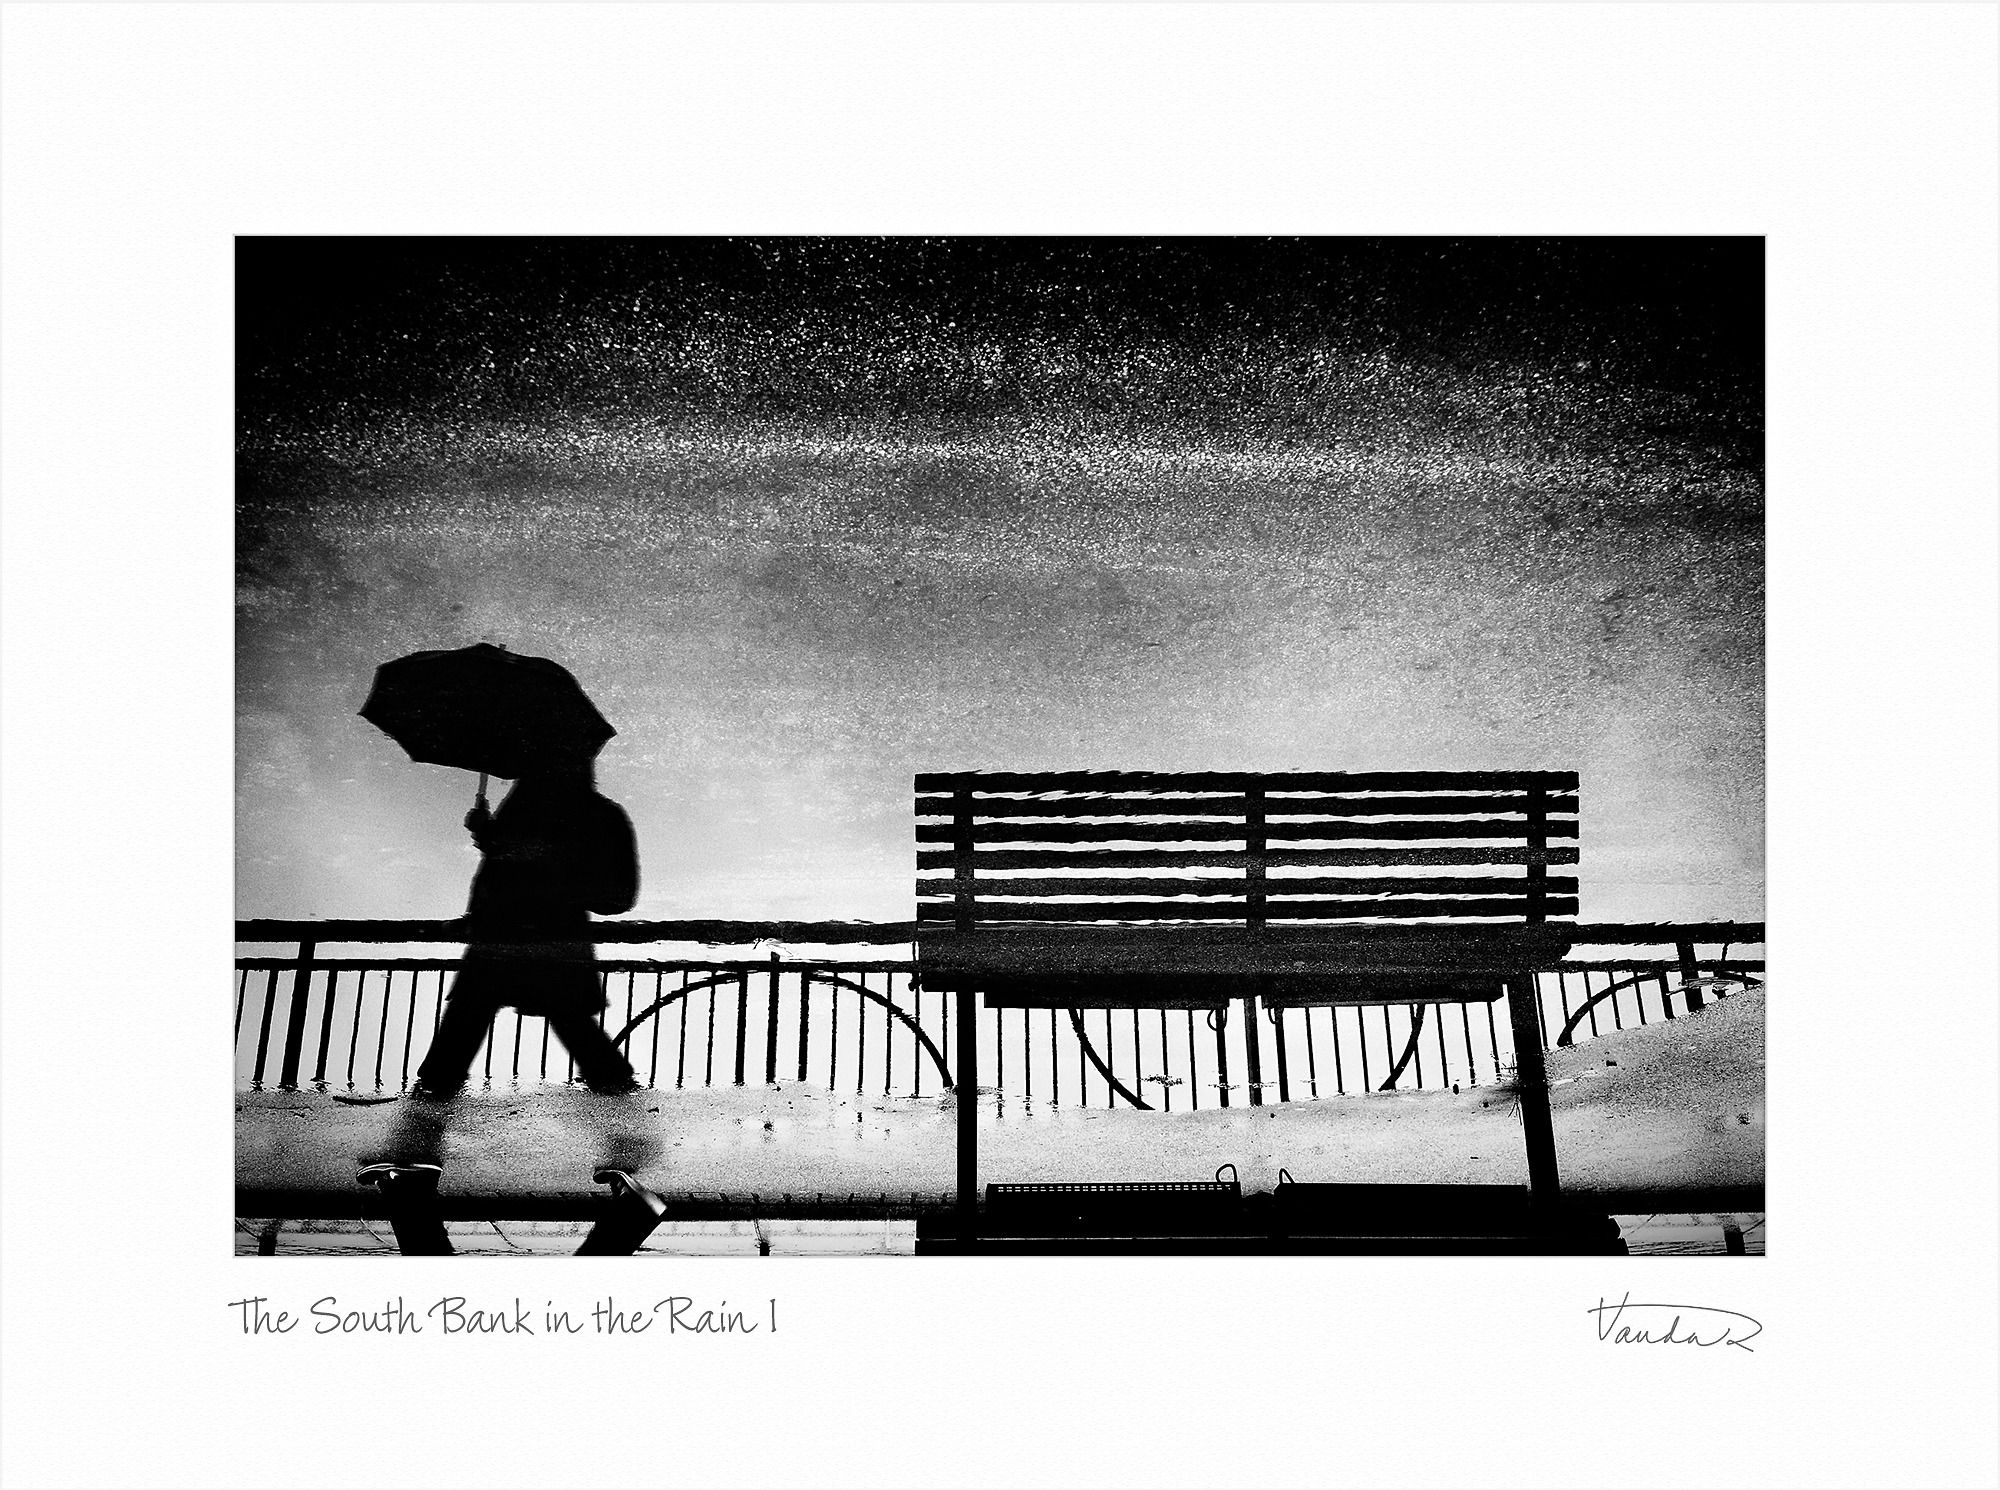 The South Bank in the Rain I